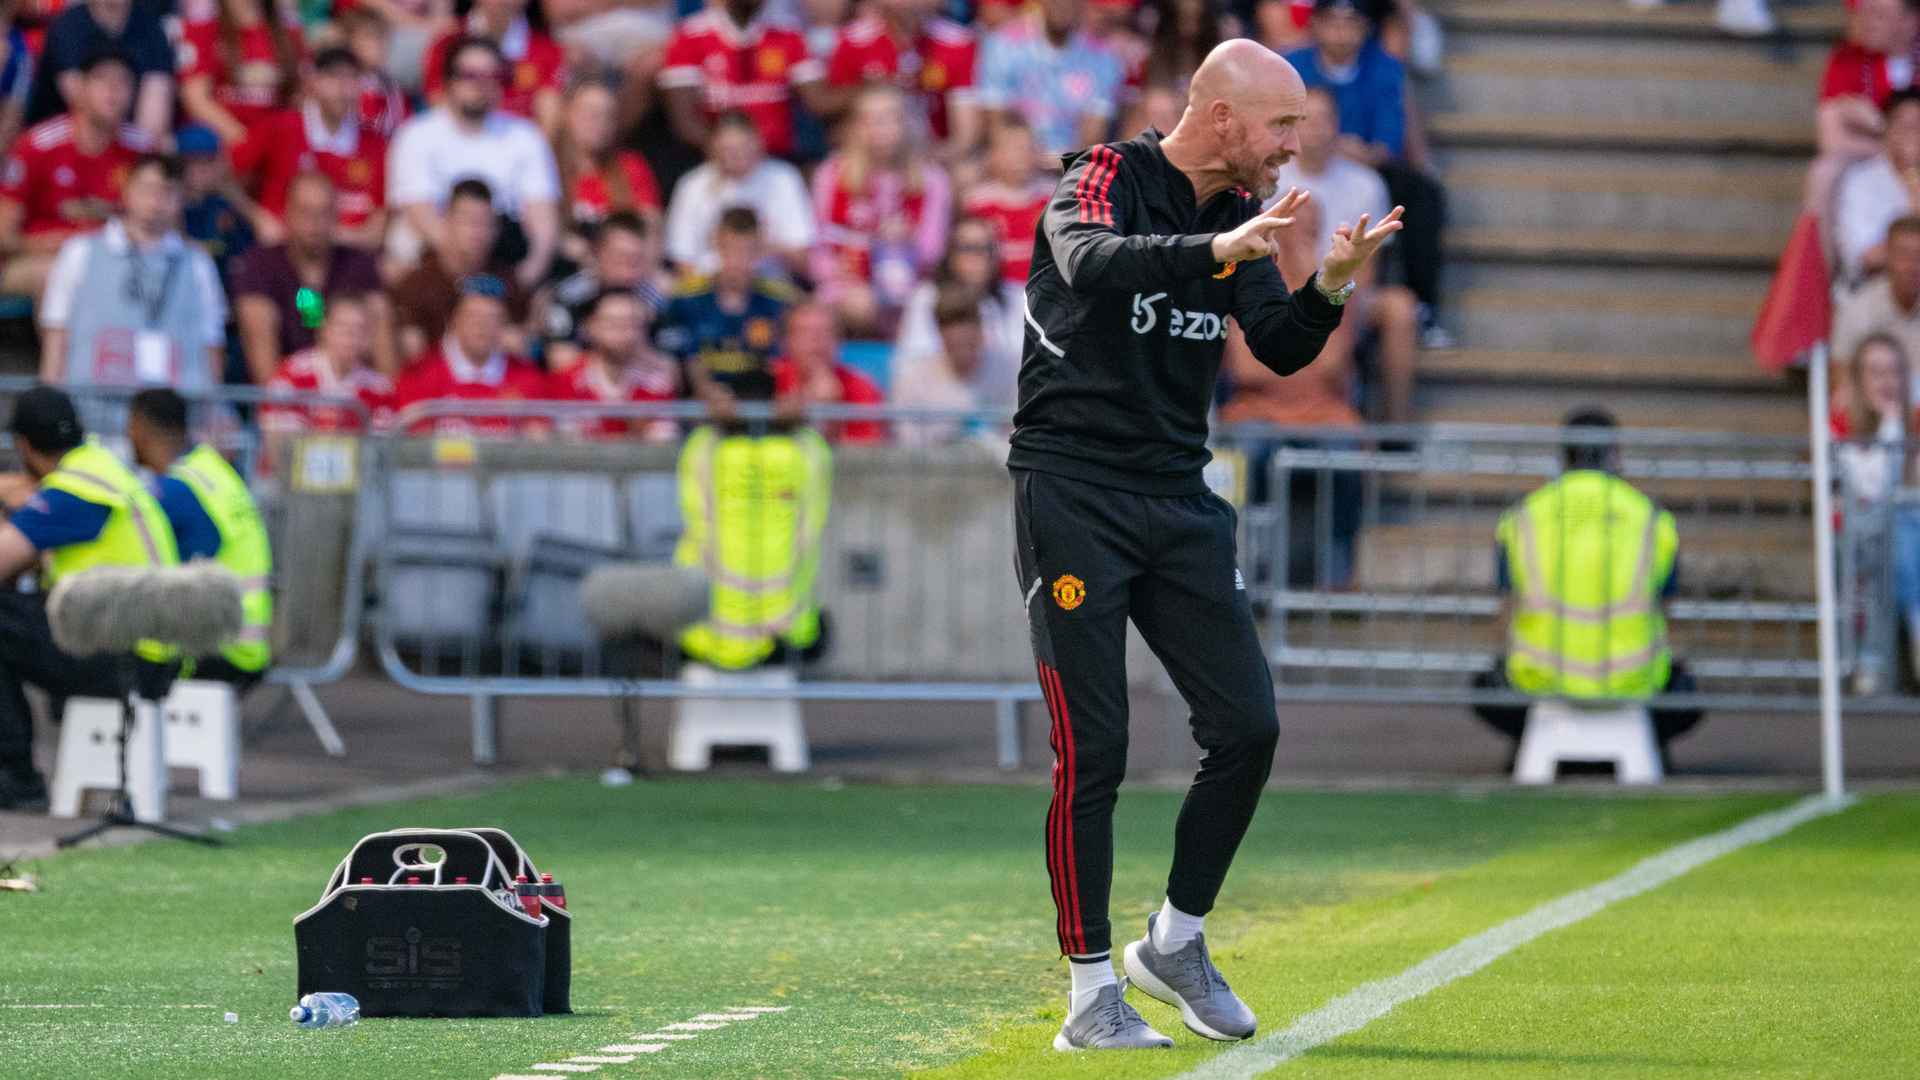 Ten Hag: Our aim is always to win